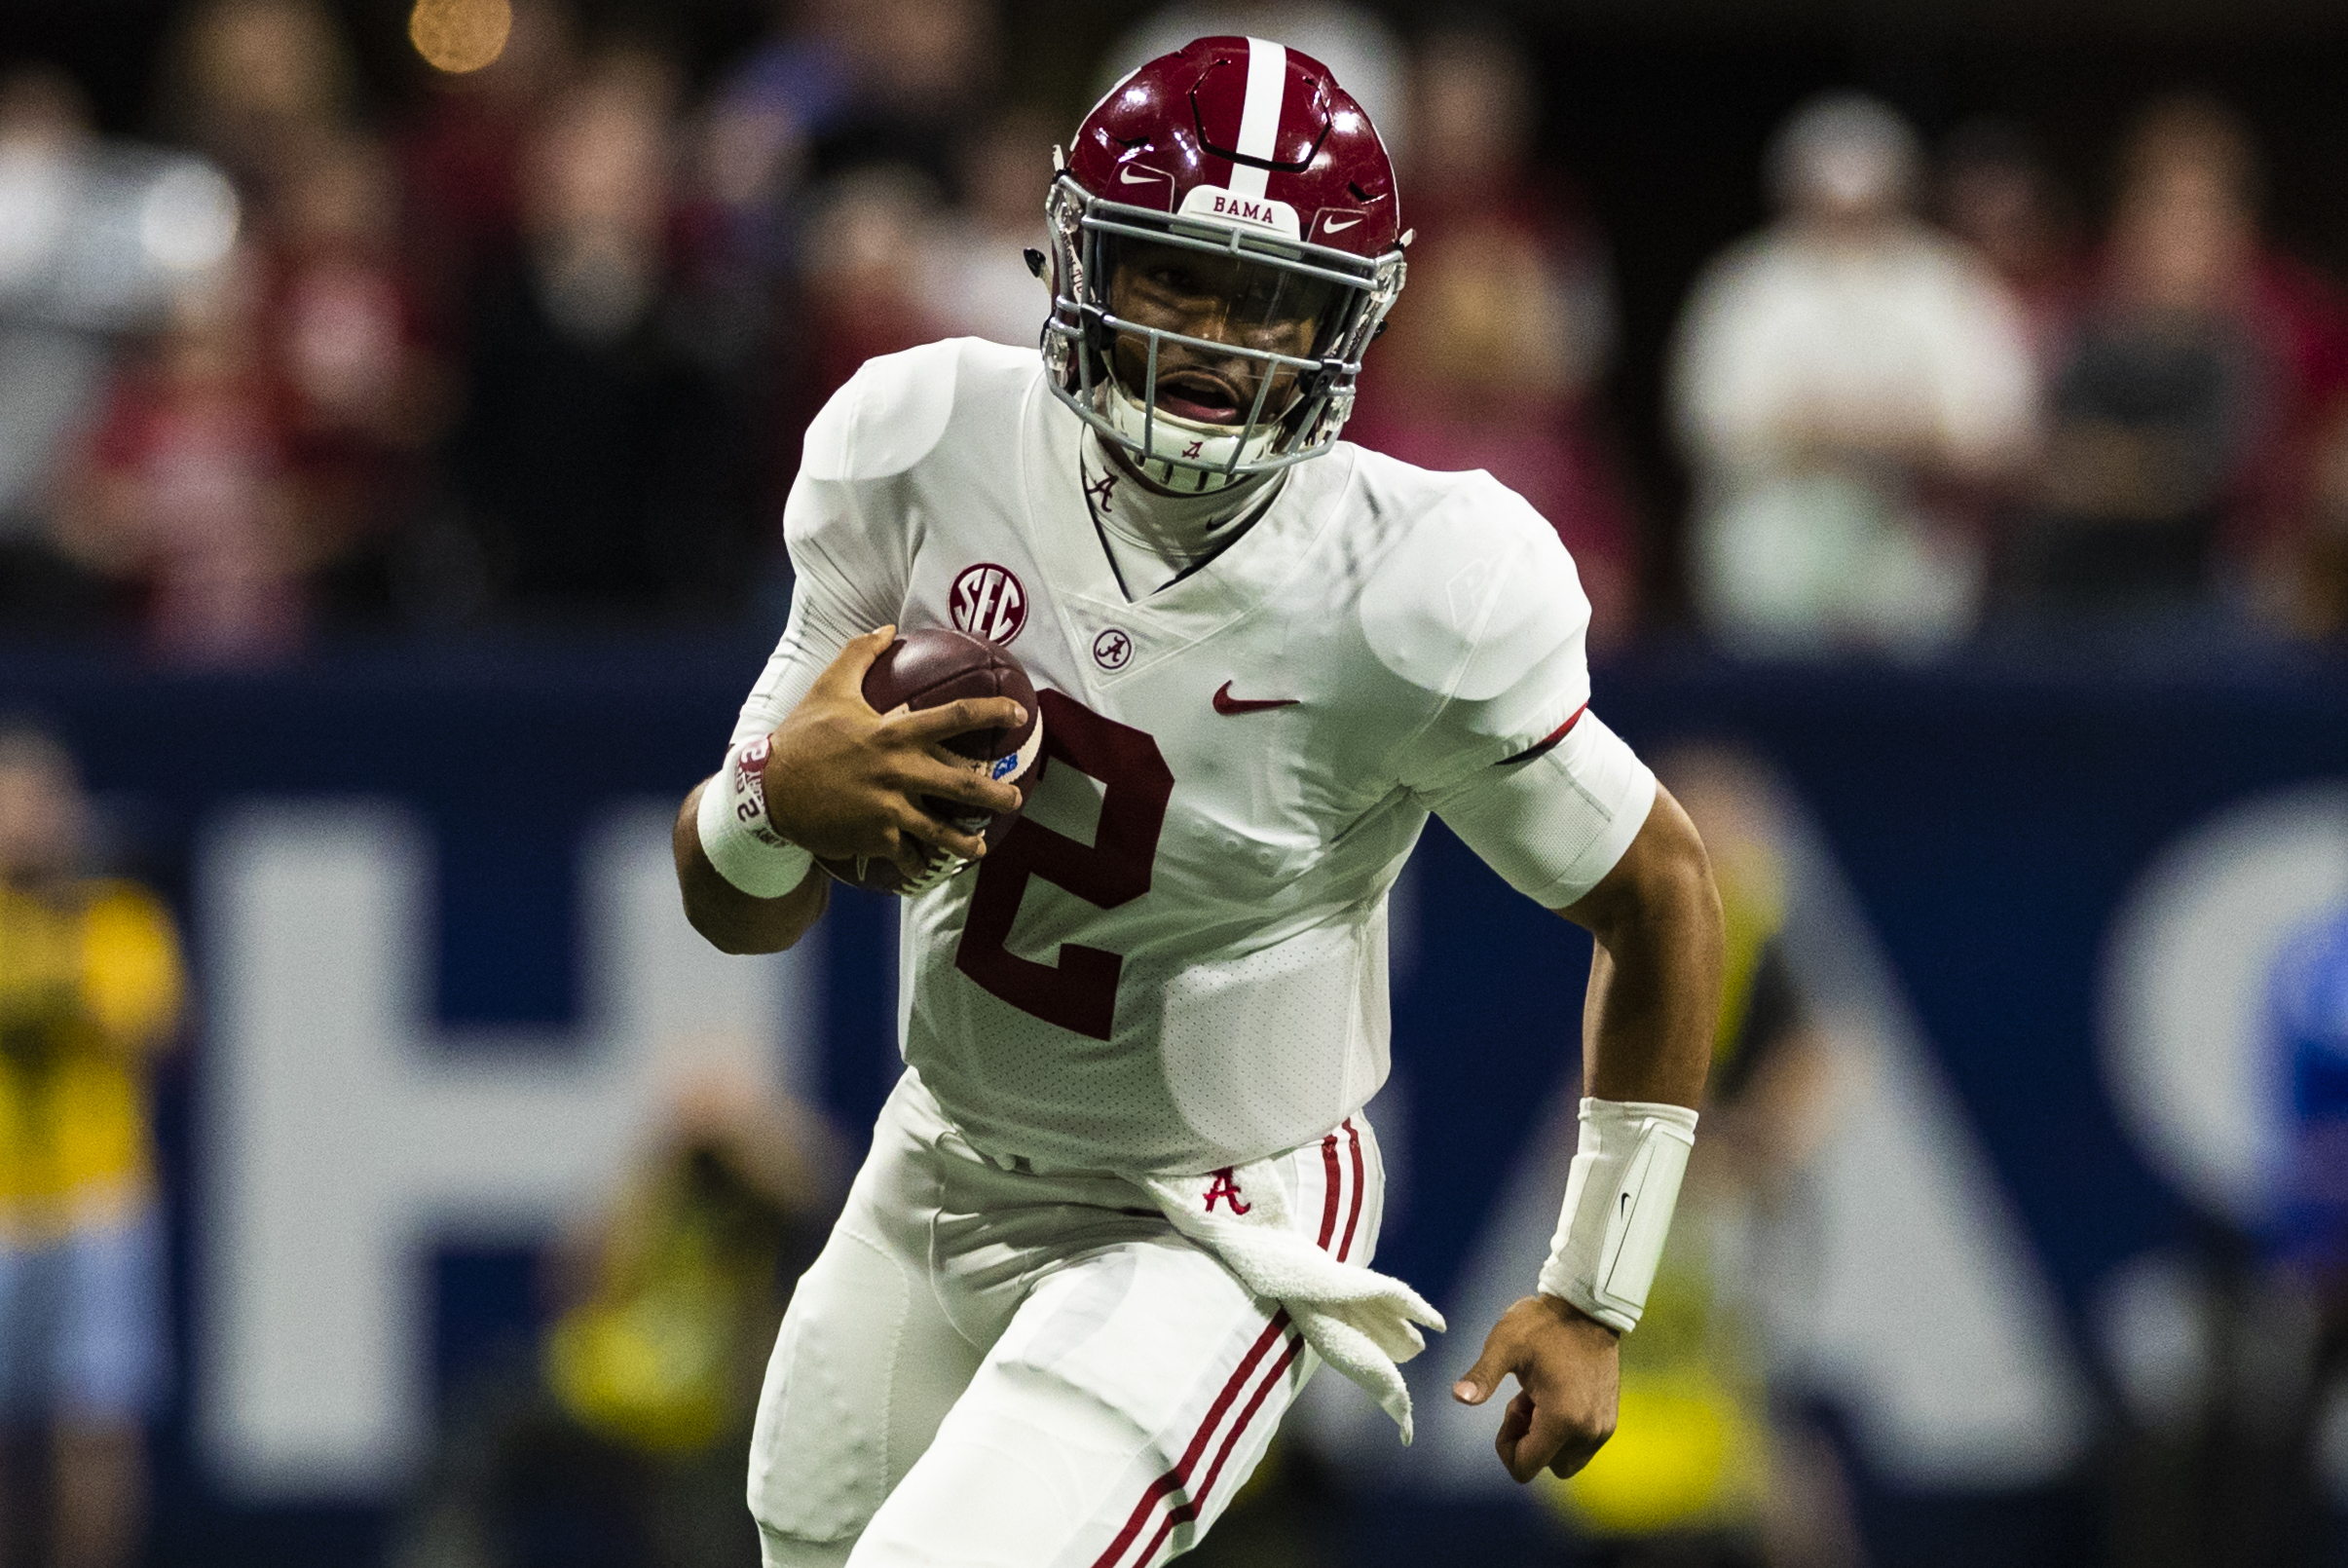 Video: Eagles' Jalen Hurts Announces on Twitter He'll Wear No. 2 Jersey, News, Scores, Highlights, Stats, and Rumors